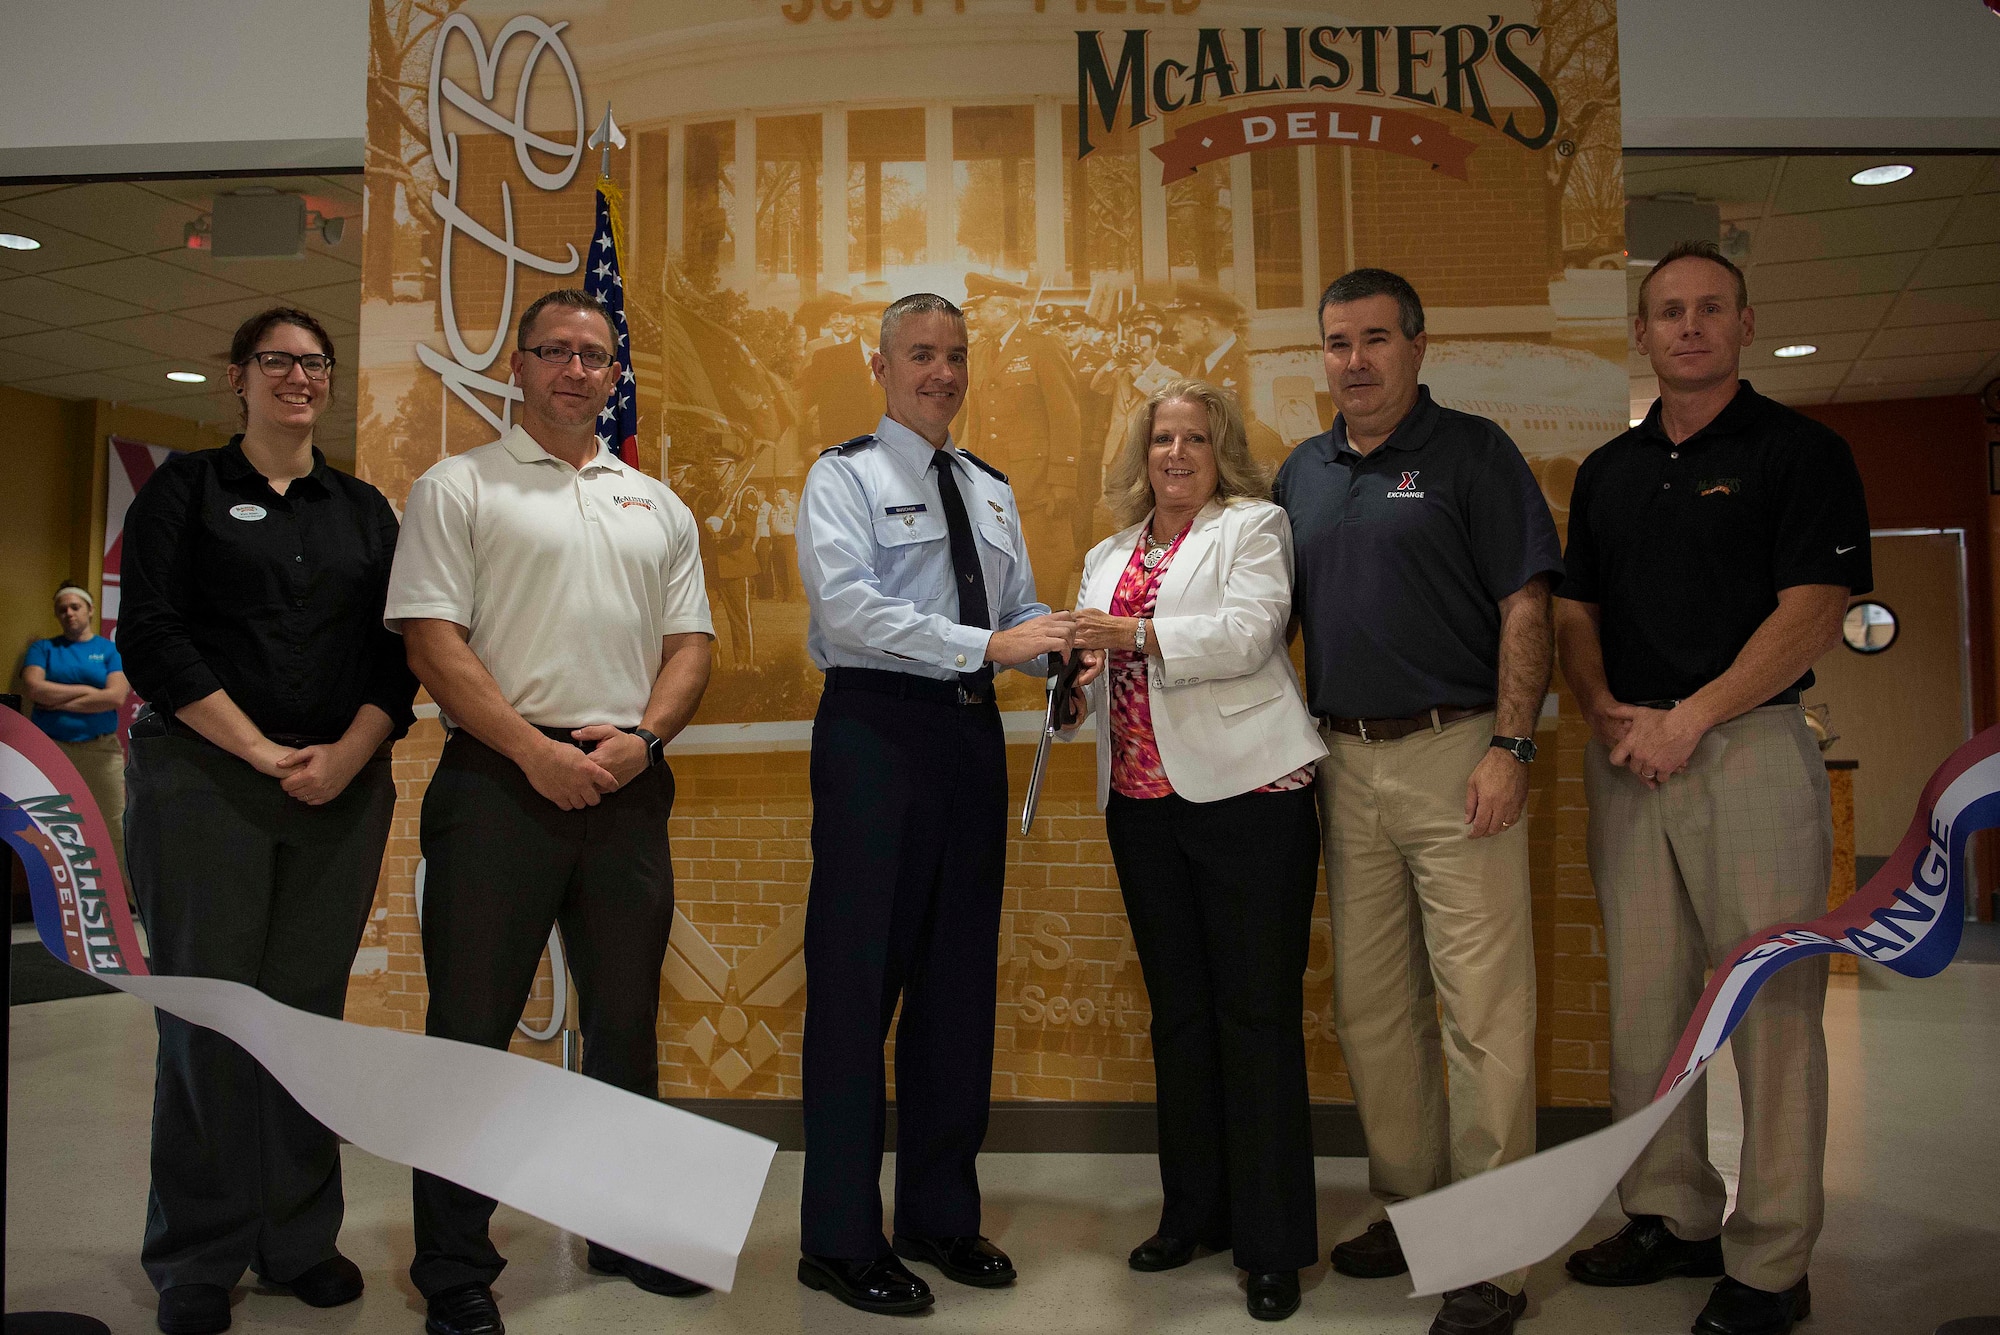 Exchange Welcomes McAlisters Deli To Scott Scott Air Force Base